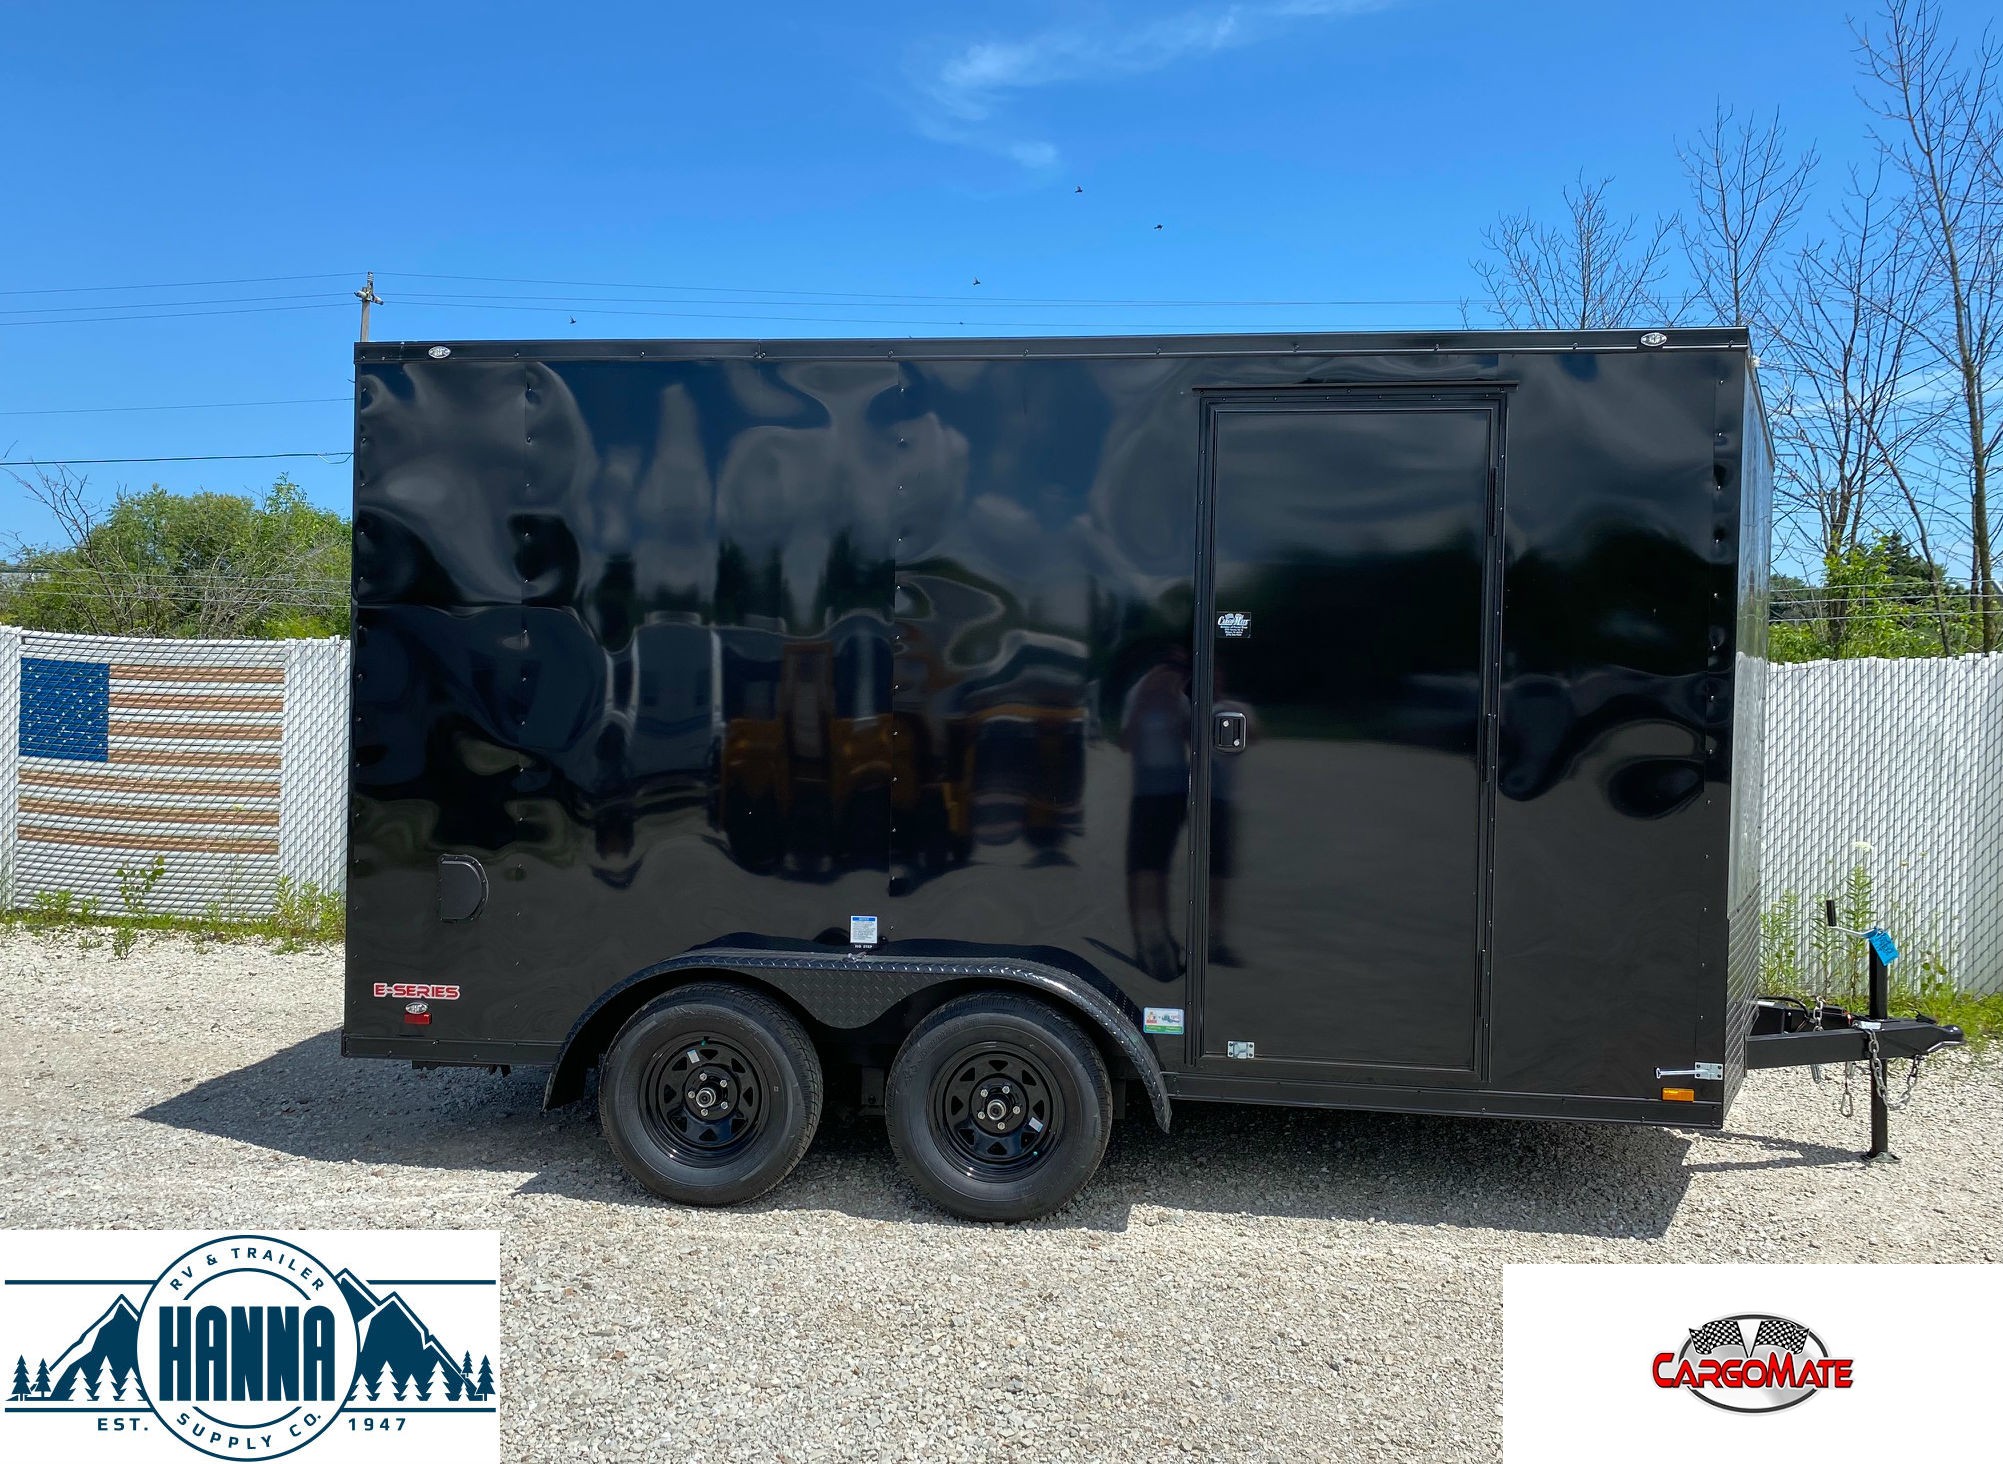 Top Cargo Trailers for sale in Wisconsin